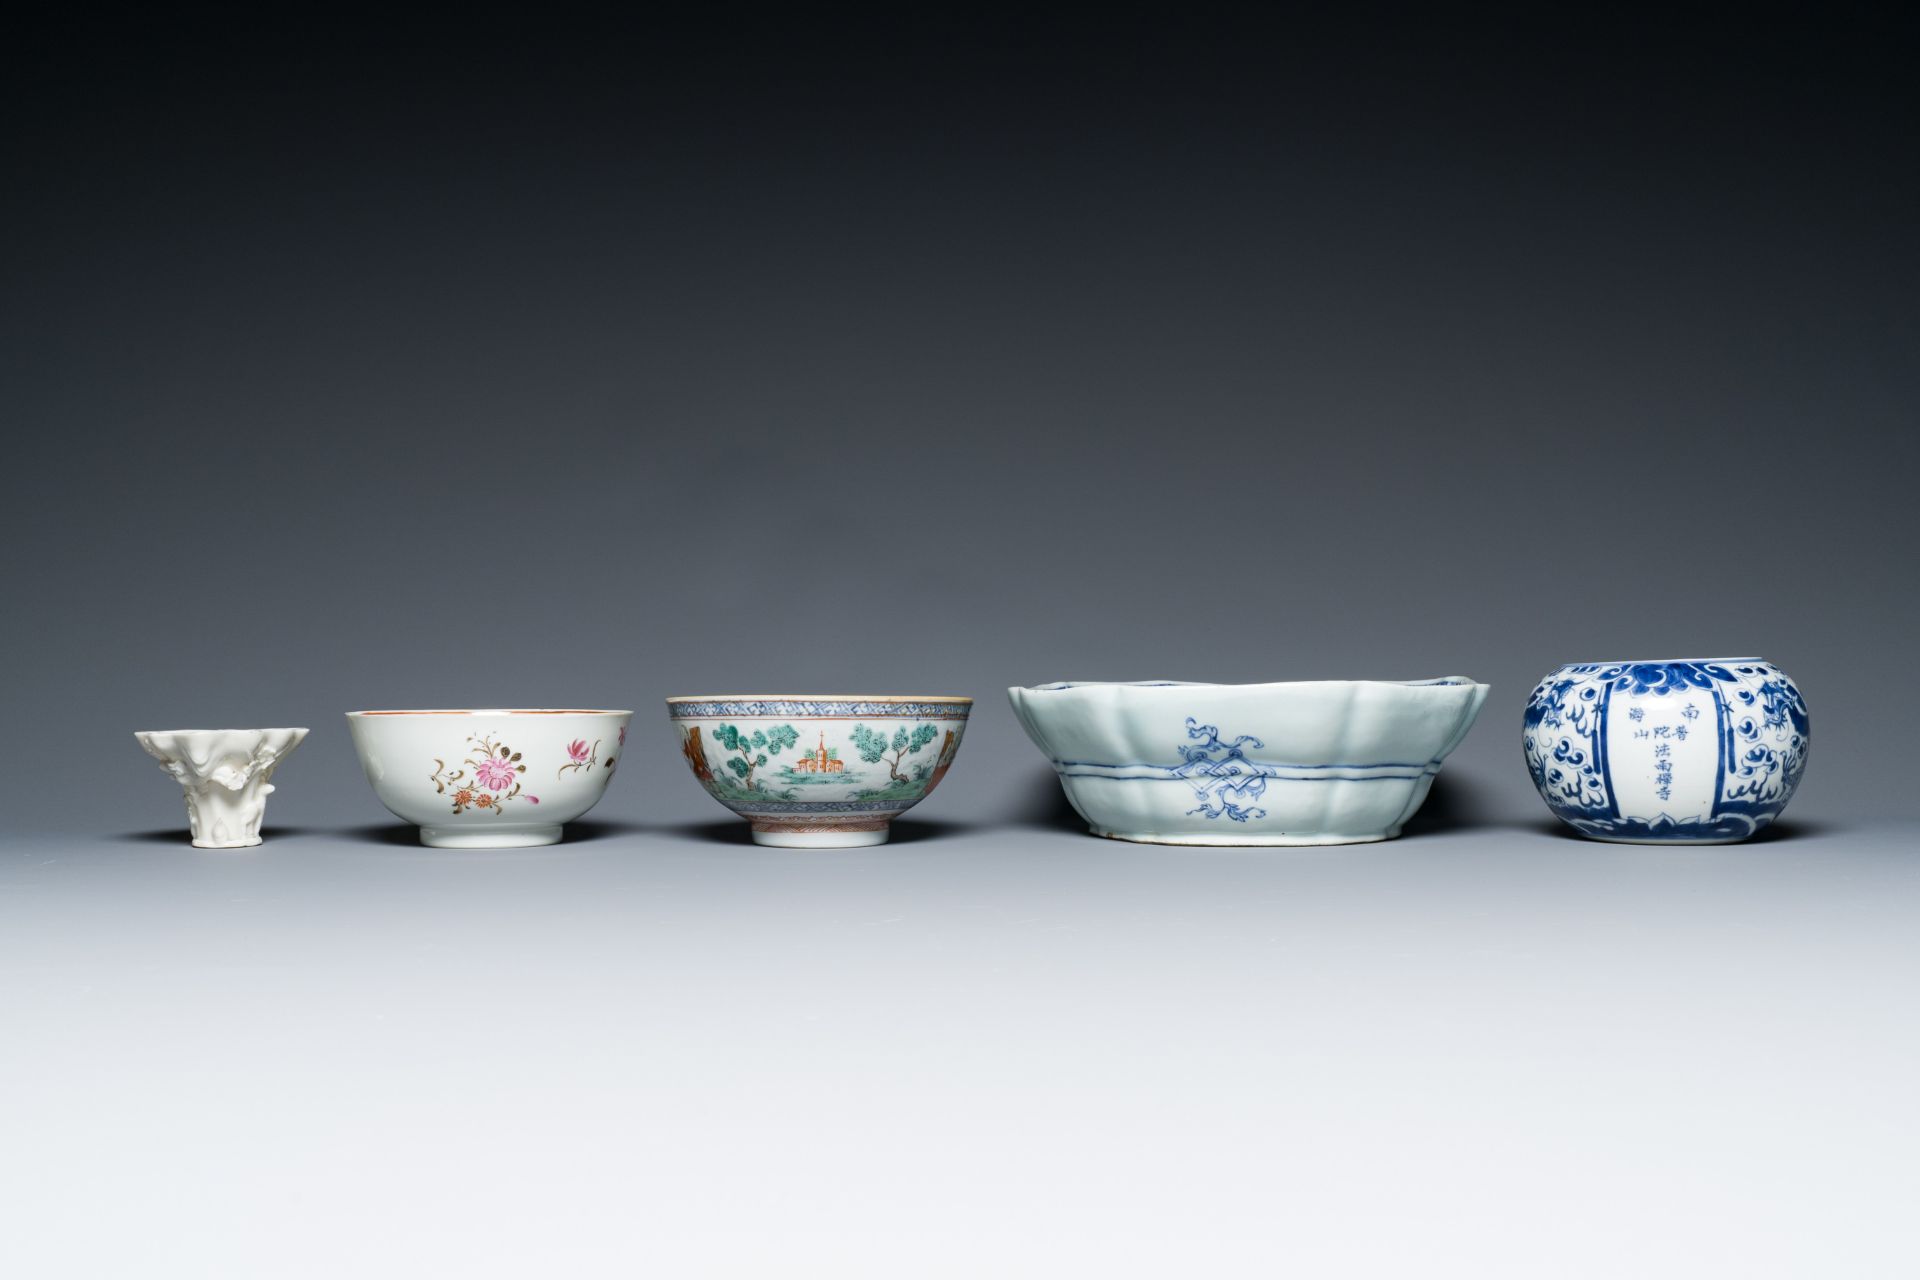 A varied collection of Chinese porcelain, 18/19th C. - Image 5 of 9